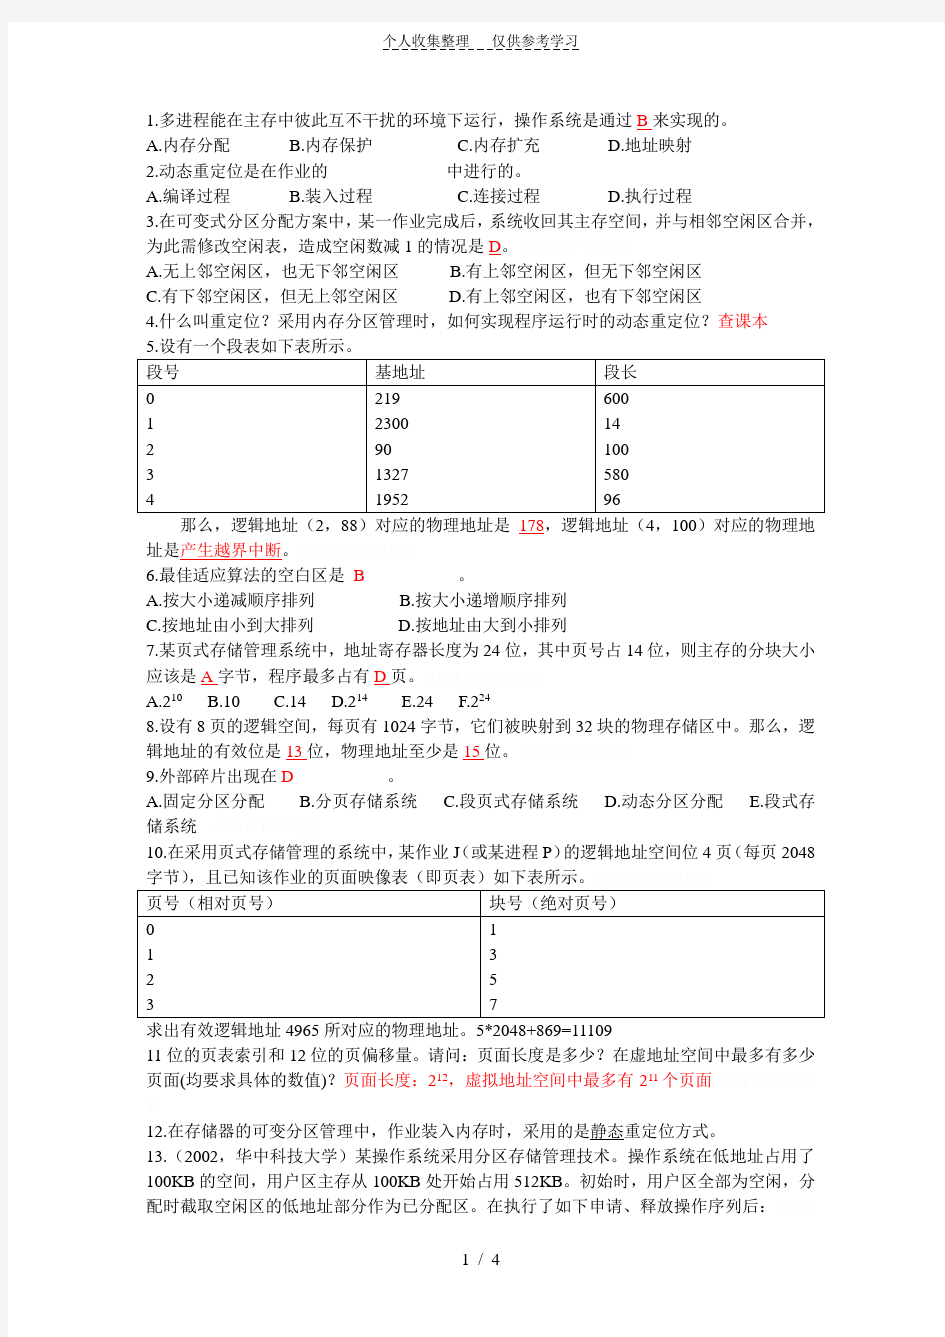 chapter4存储器管理(答案)